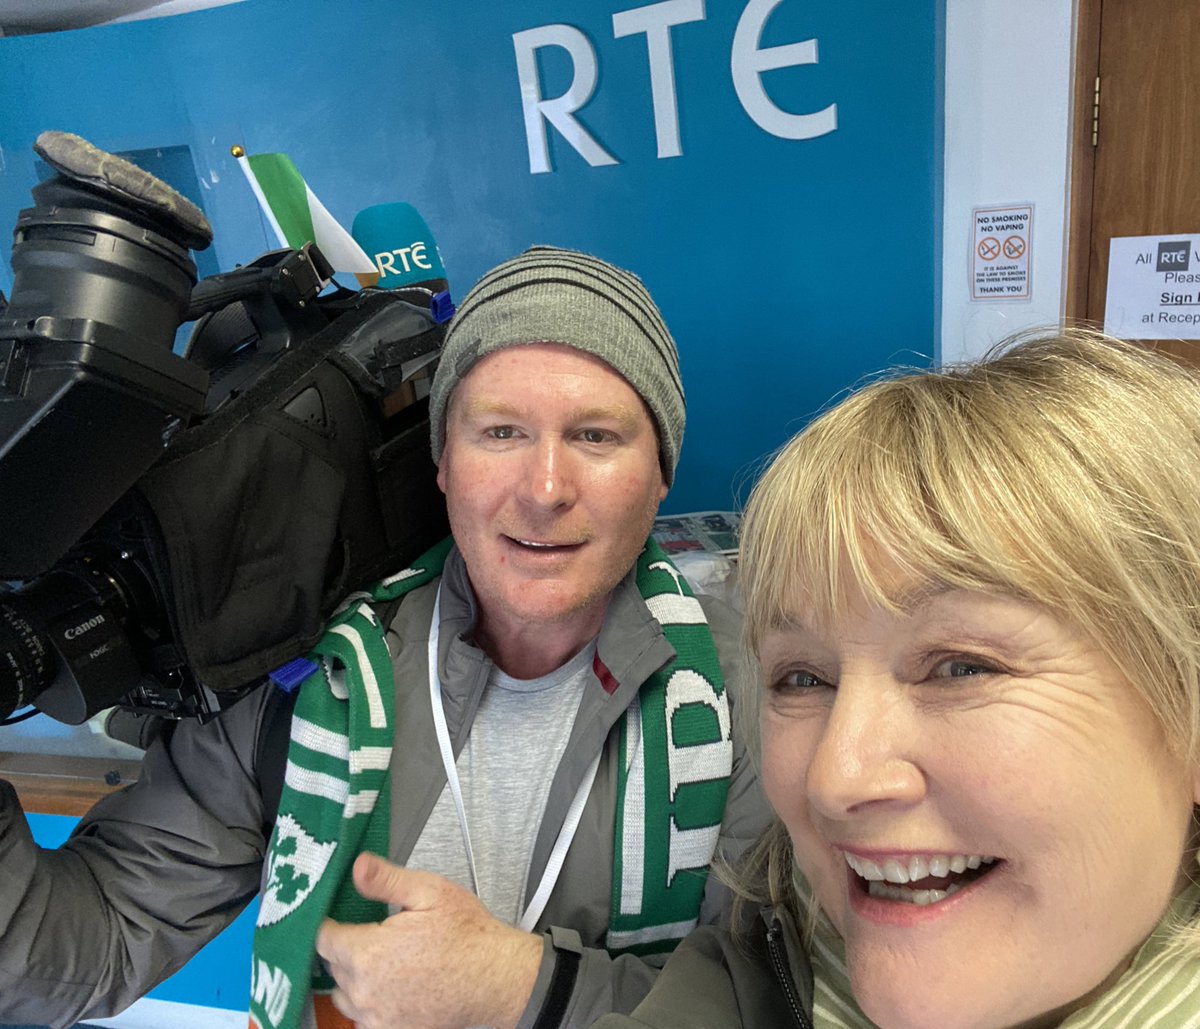 Camera, mic, comfortable shoes… ☘️☘️☘️☘️☘️☘️☘️☘️☘️☘️☘️☘️ ☘️☘️☘️Almost time! ☘️☘️☘️☘️☘️☘️☘️☘️☘️☘️☘️☘️☘️☘️☘️☘️ Cork’s #StPatricksDay2024 parade 1pm (We reckon this is our 9th time covering the Cork City parade together!!!) more @rtenews #loveCORK